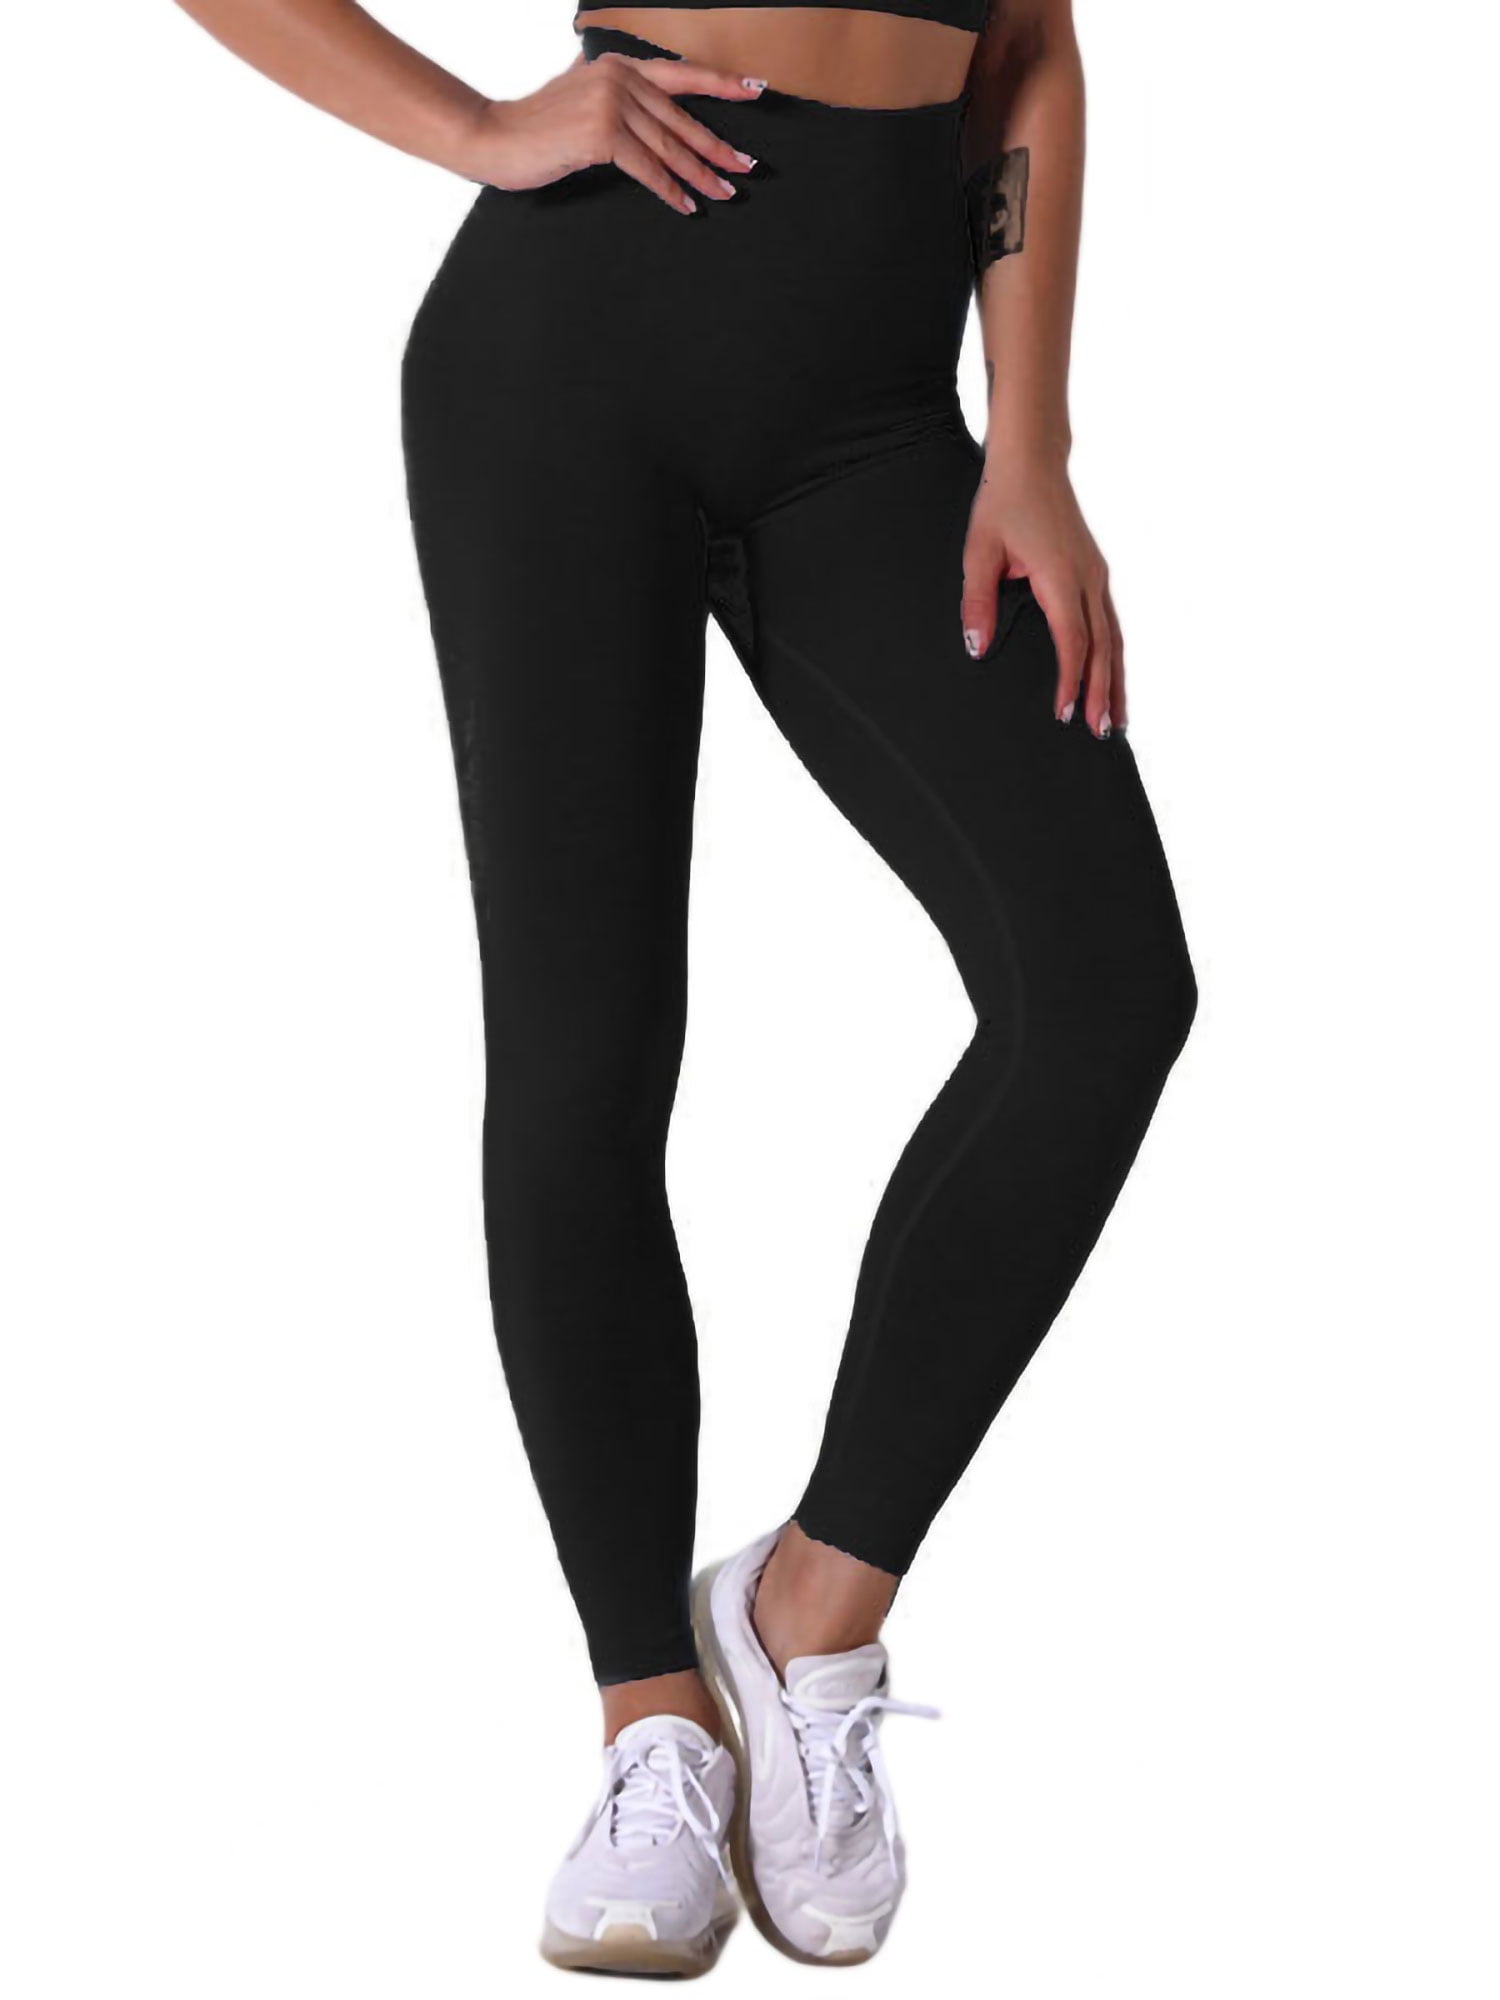 Niuer Womens High Waisted Buttery Soft Leggings Exercise Dry Fit 7/8 ...